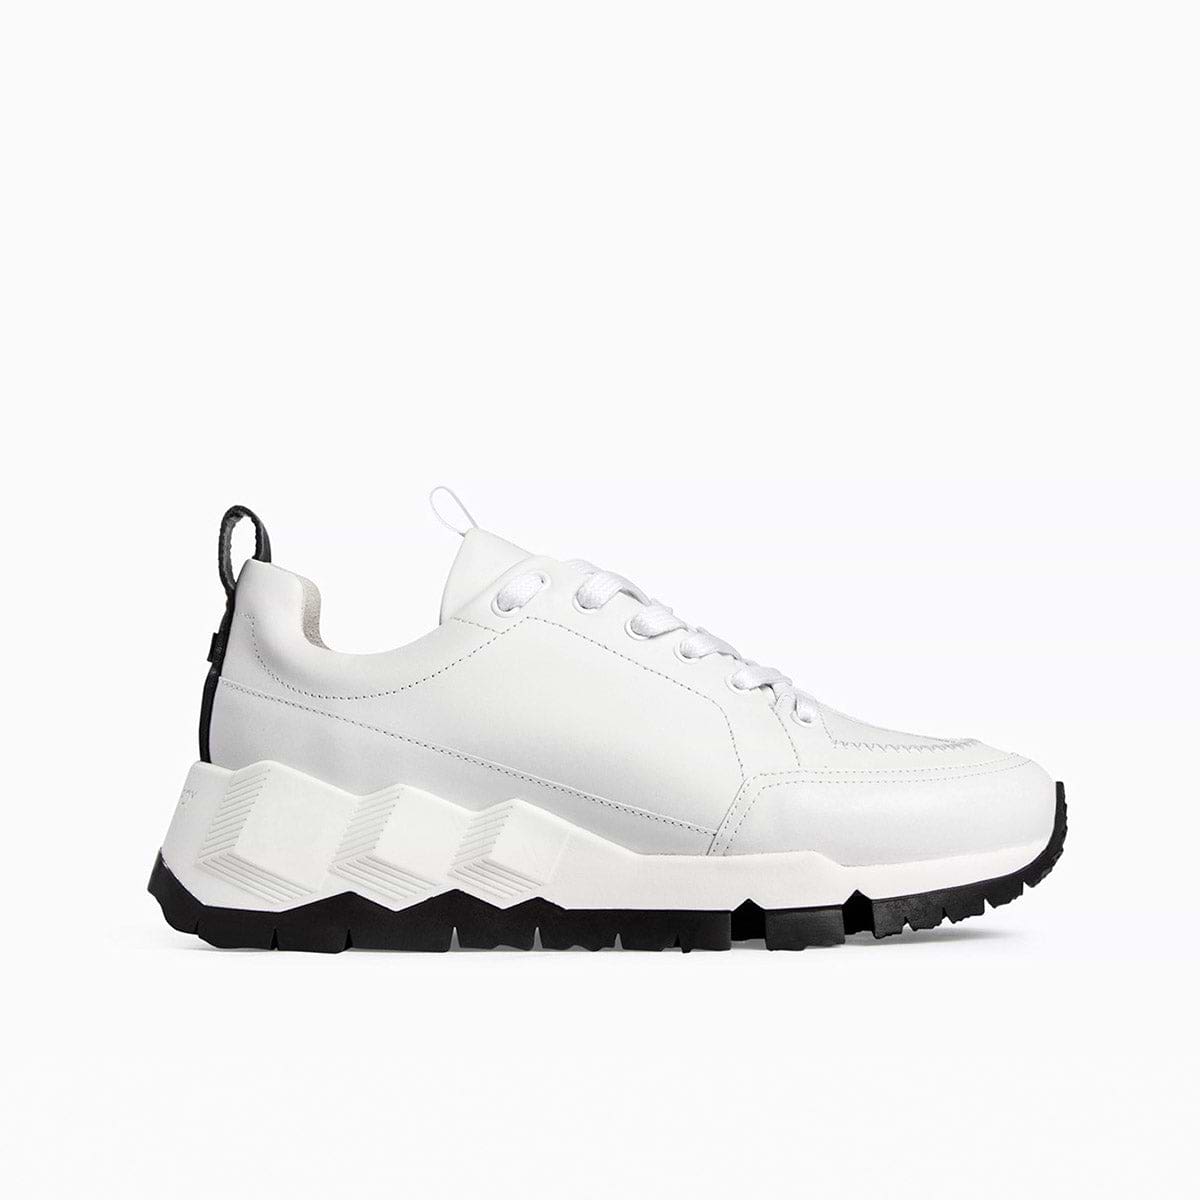 STREET LIFE sneakers for men in white calf leather — PIERRE HARDY